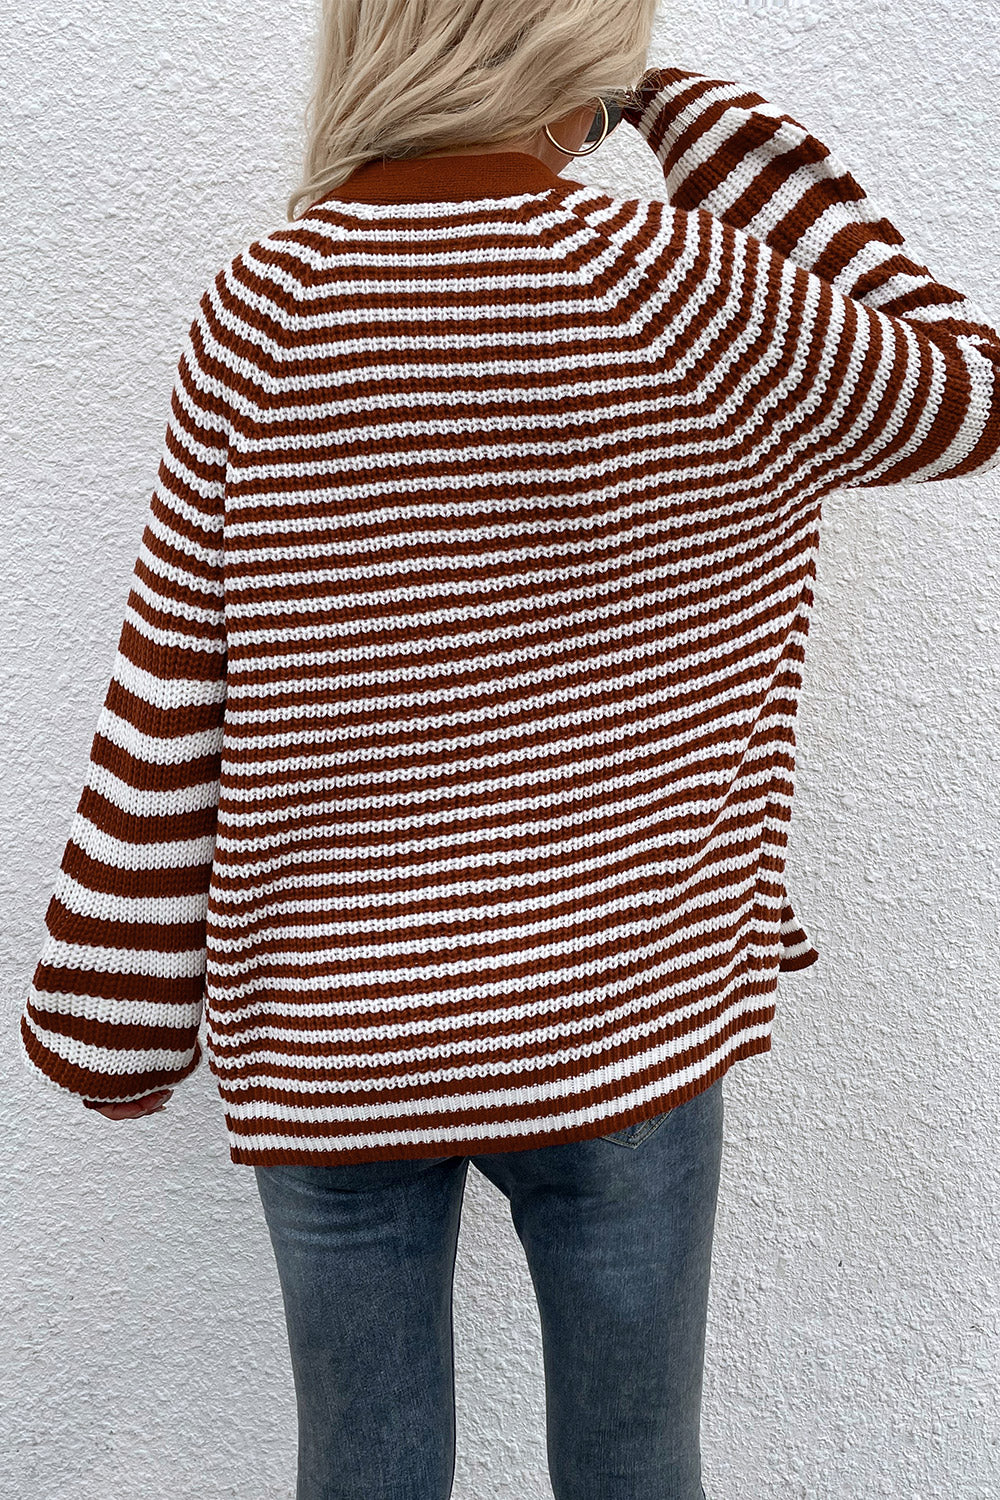 Striped V-Neck Button-Down Cardigan - Women’s Clothing & Accessories - Shirts & Tops - 2 - 2024